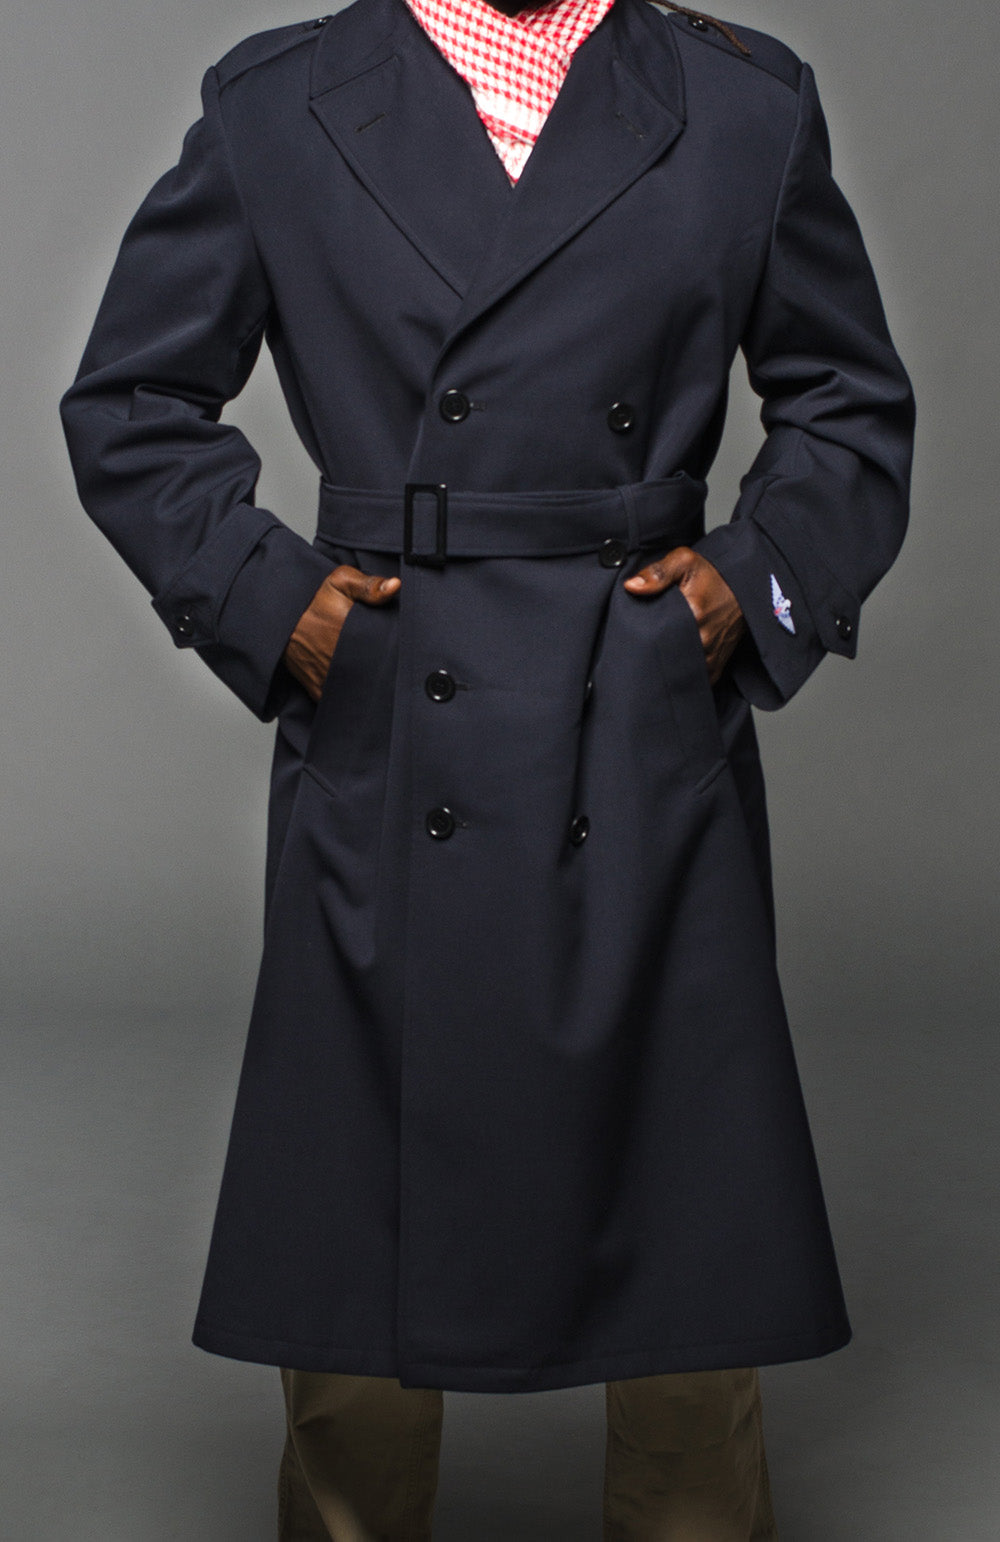 Mens Military Wool Outerwear Double Breasted Trench Long Coat Overcoat  Jacket 